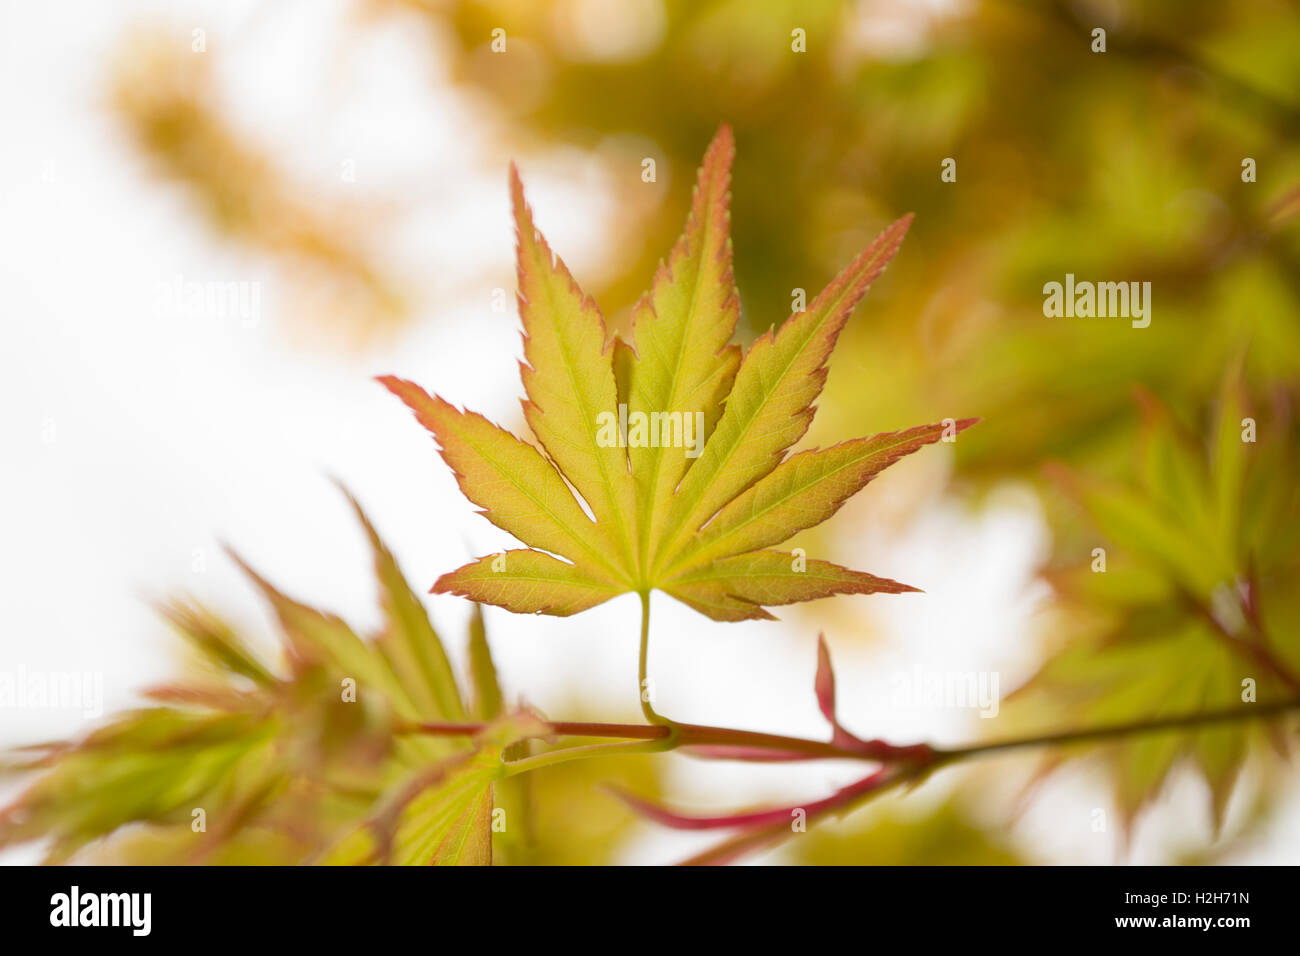 A green and yellow Acer leaf in Cornwall, centrally framed with a shallow focus. Stock Photo